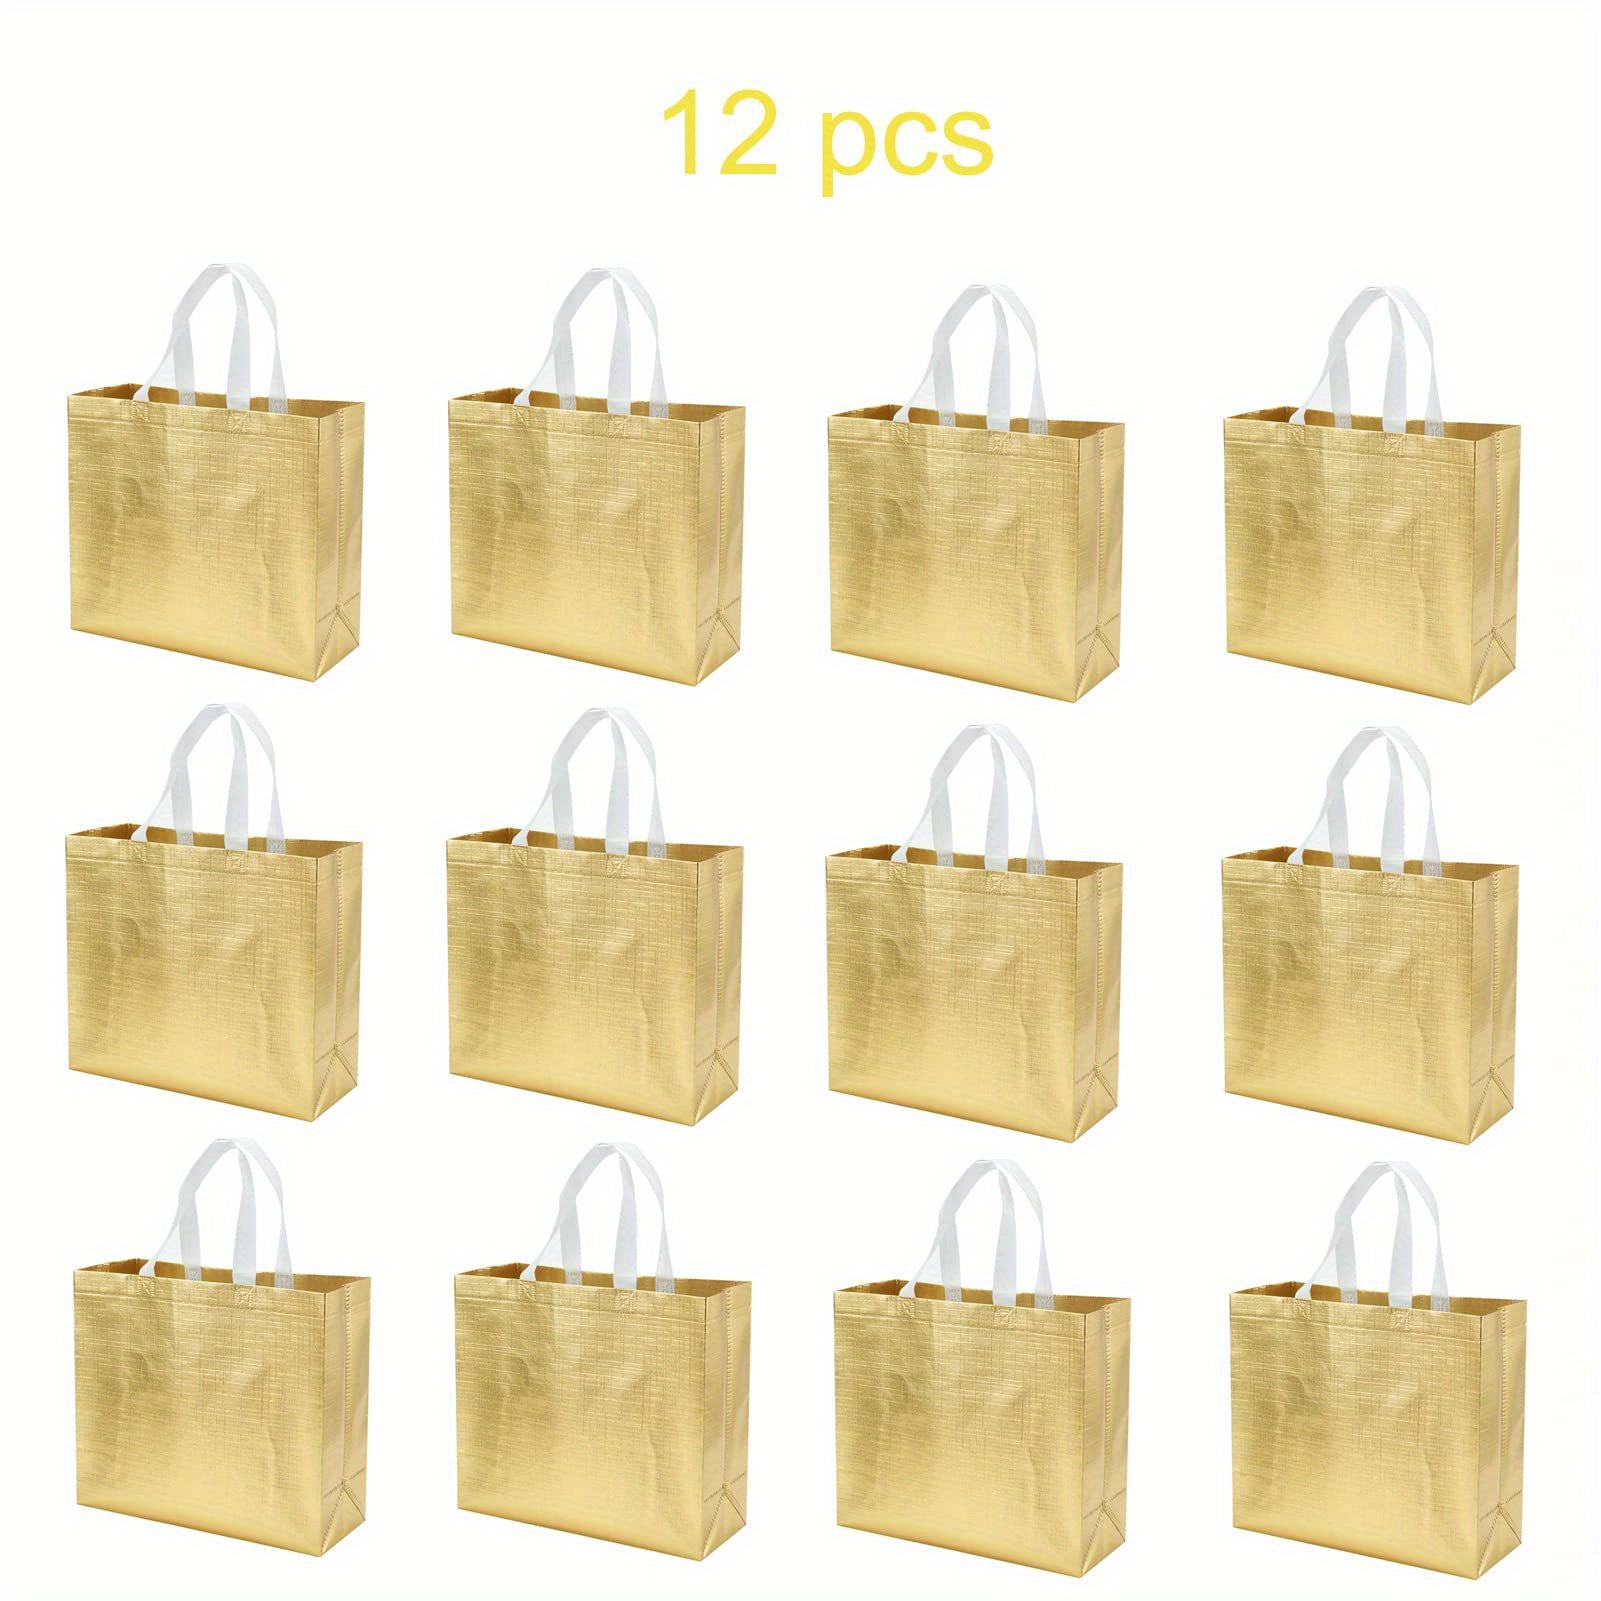 Gadpiparty Storage Bag Organizer 12Pcs Glossy Reusable Grocery Bags Tote  Bags with Handle Present Bag Gift Bag for Wedding Bridal Shower Engagement